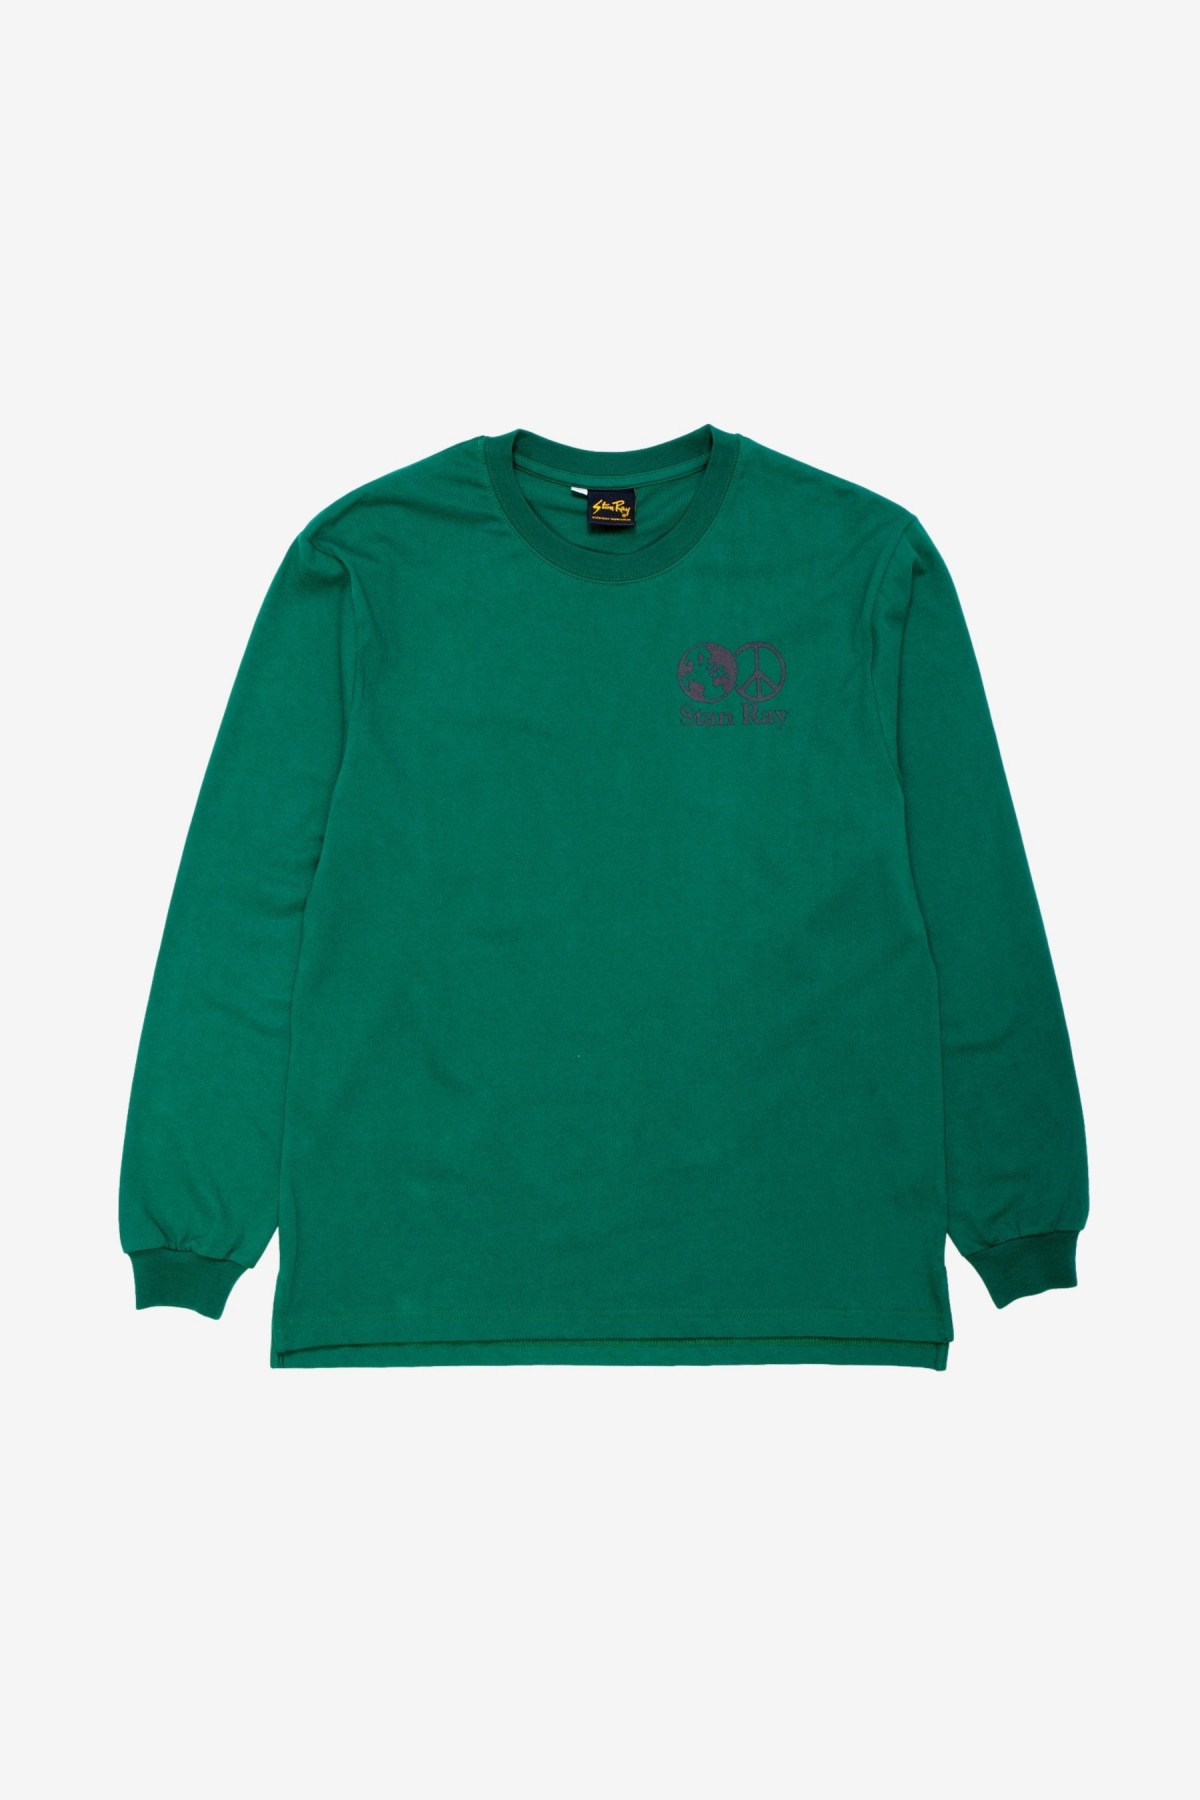 Stan Ray World Peace Long Sleeve Tee in Ivy Green